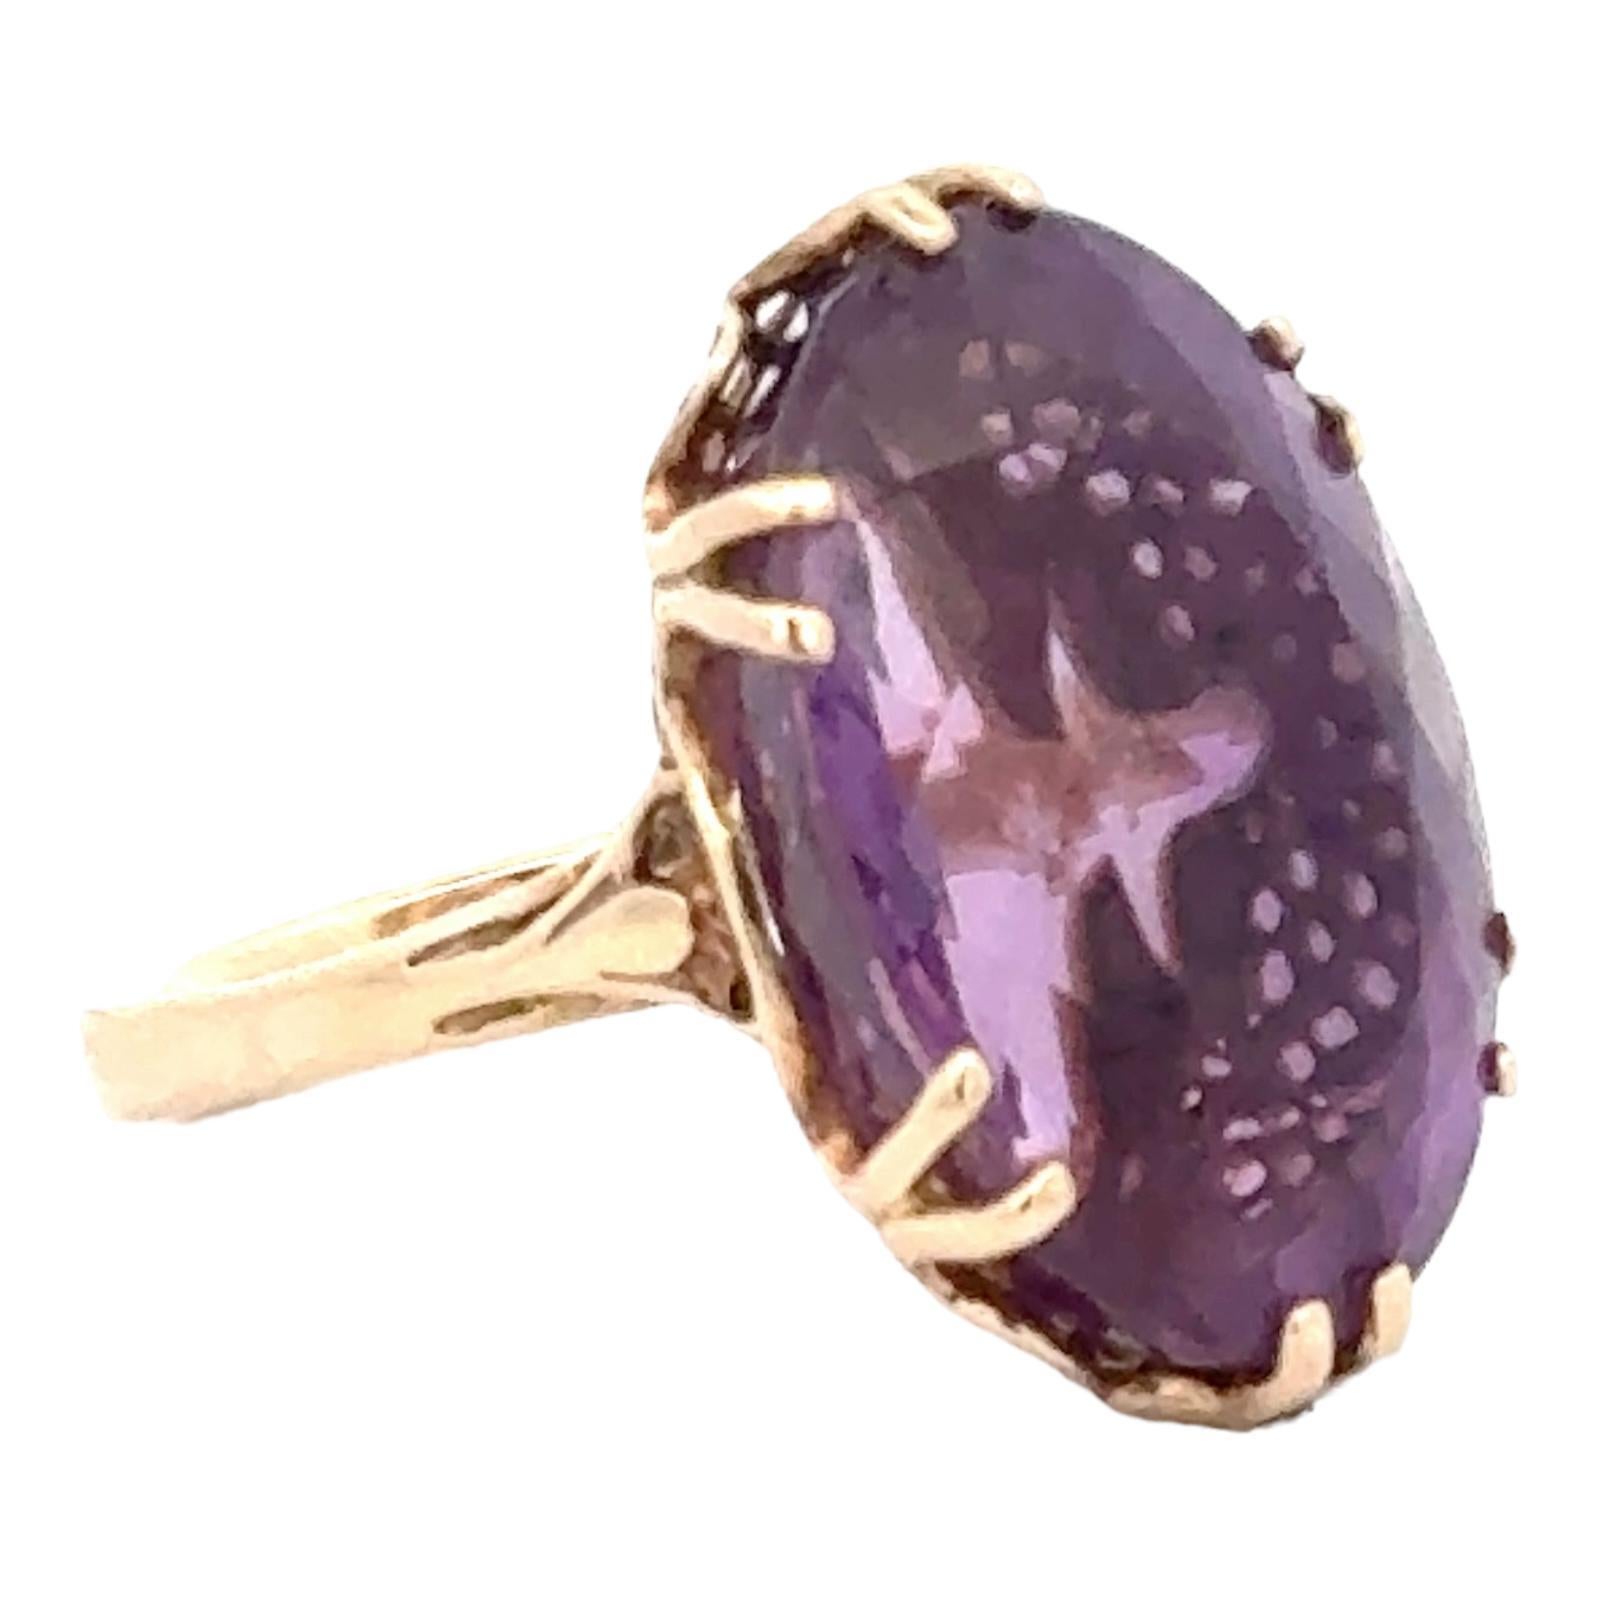 18 Carat Oval Faceted Amethyst Gemstone 14 Karat Yellow Gold Vintage Estate Ring In Excellent Condition For Sale In Boca Raton, FL